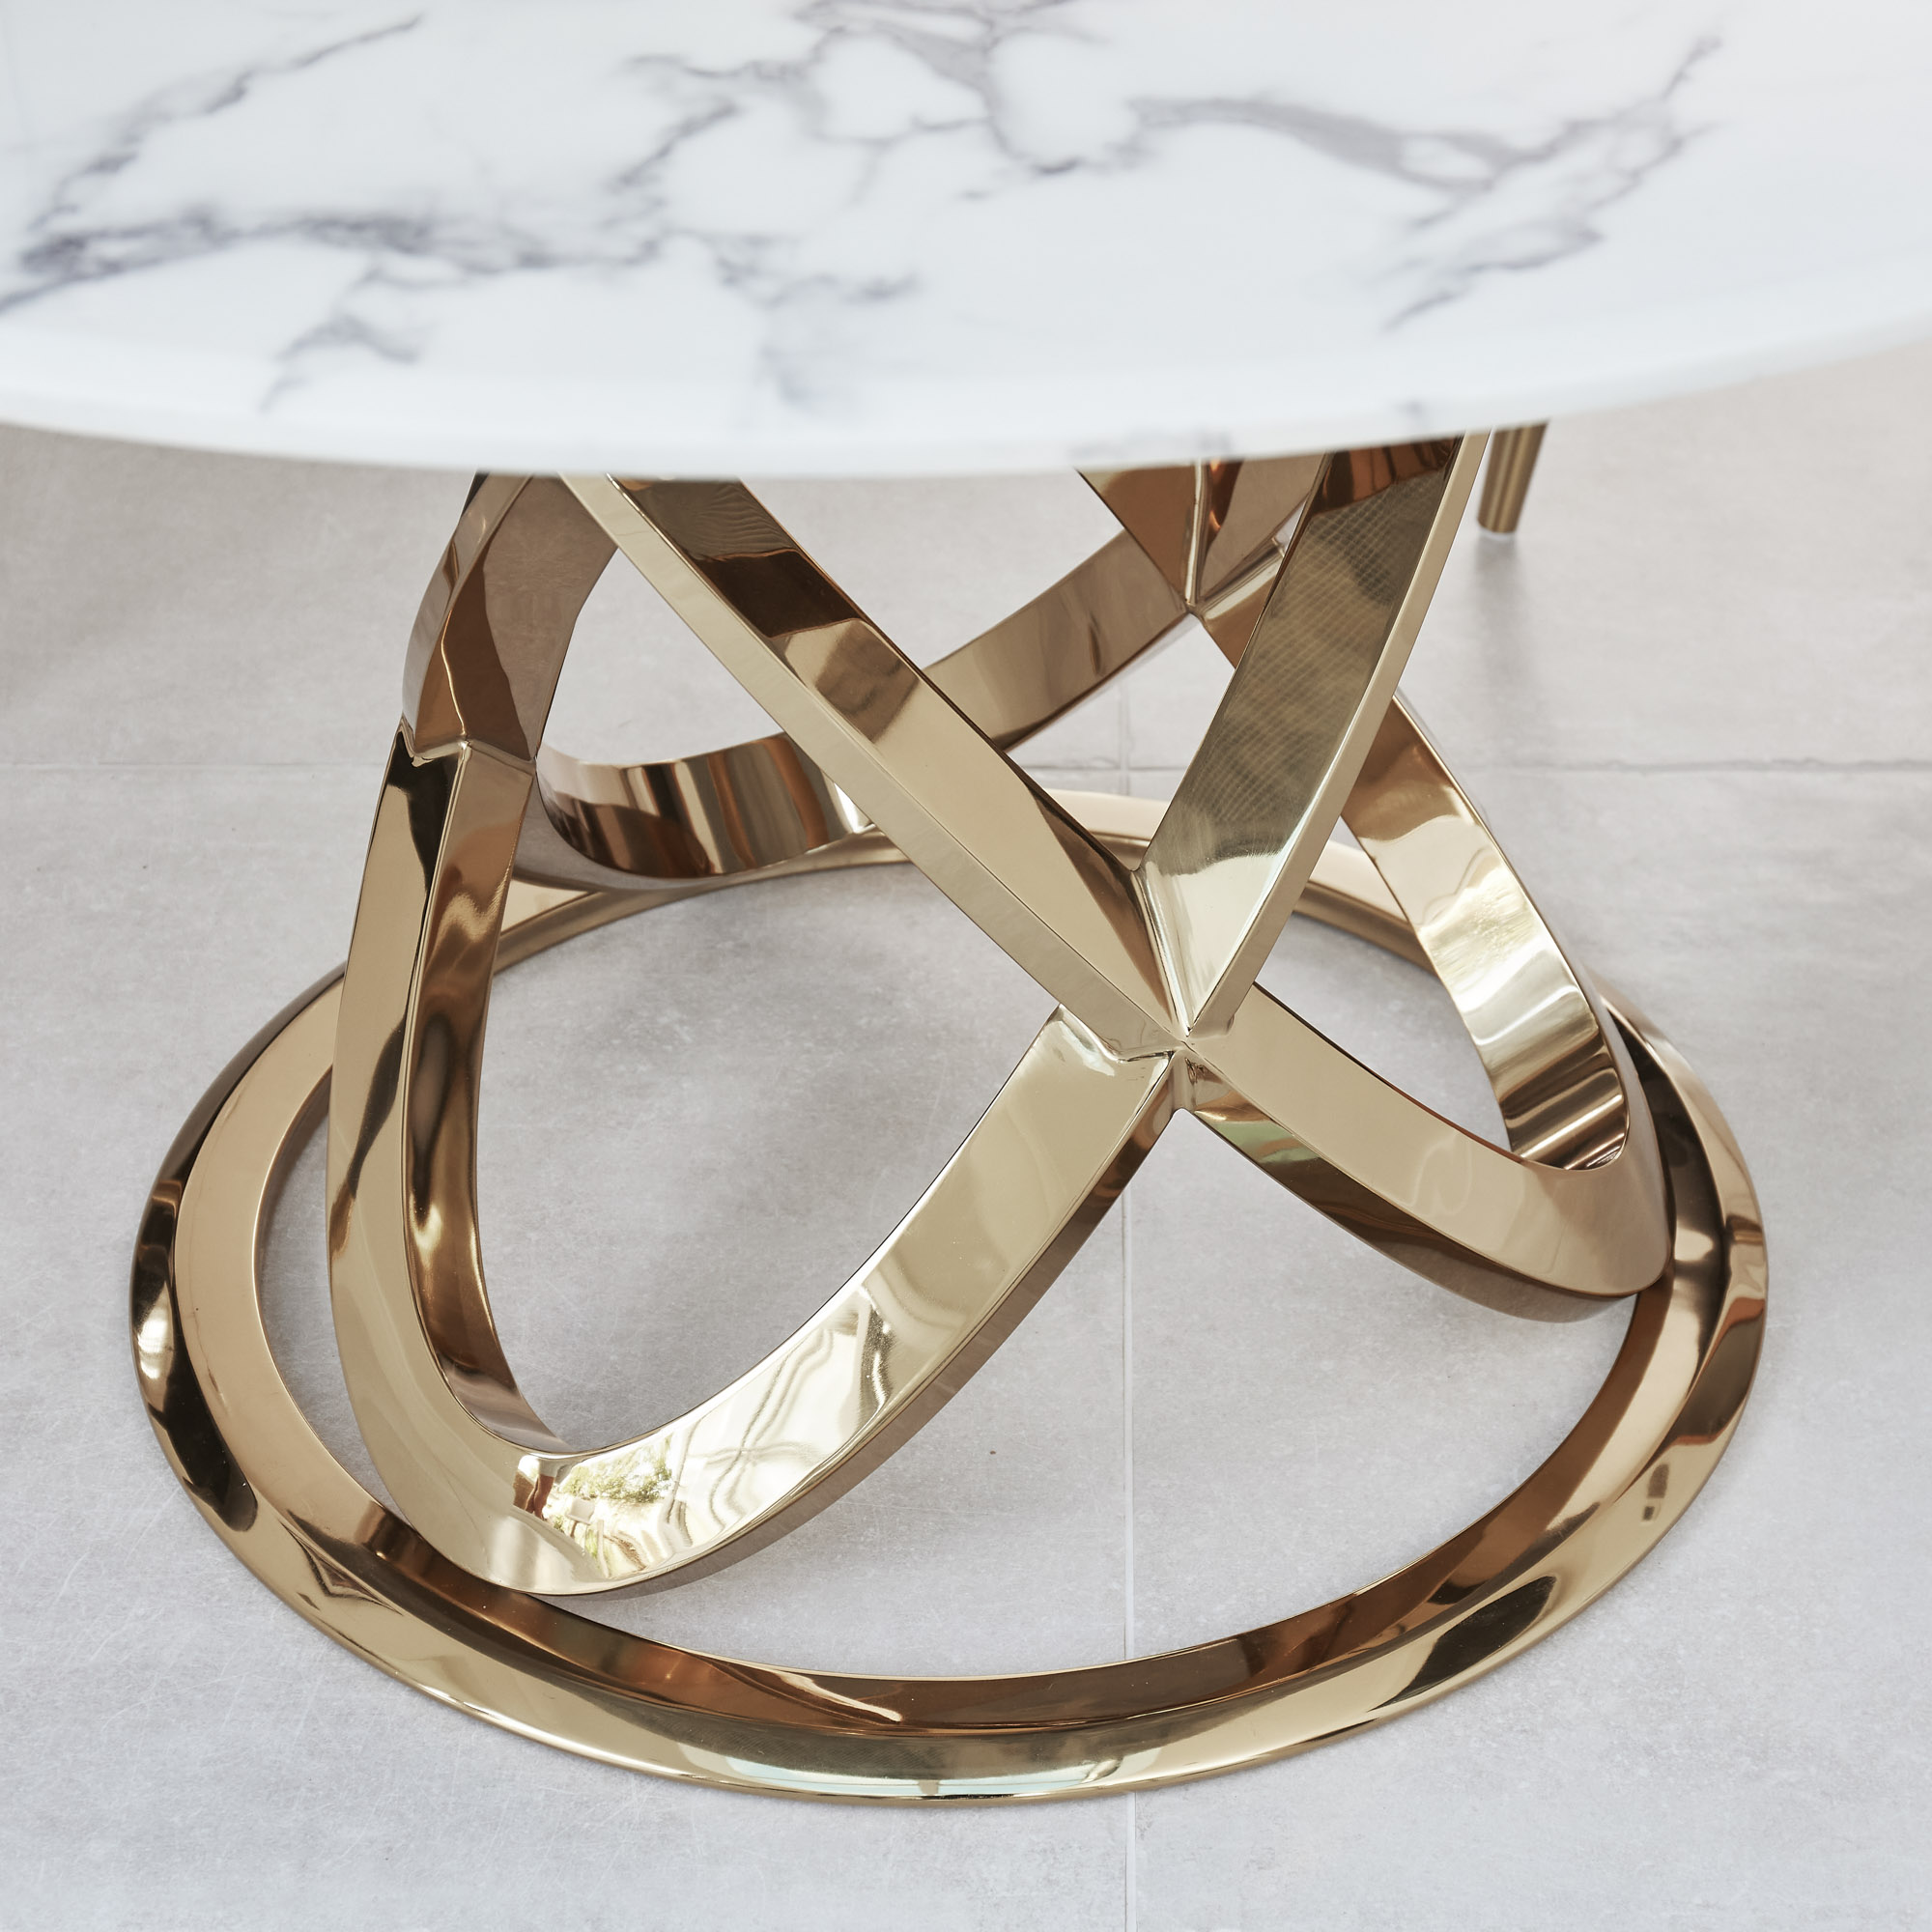 1.3M Pedestal Polished Circular Gold Stainless Steel Dining Table with White Marble Top